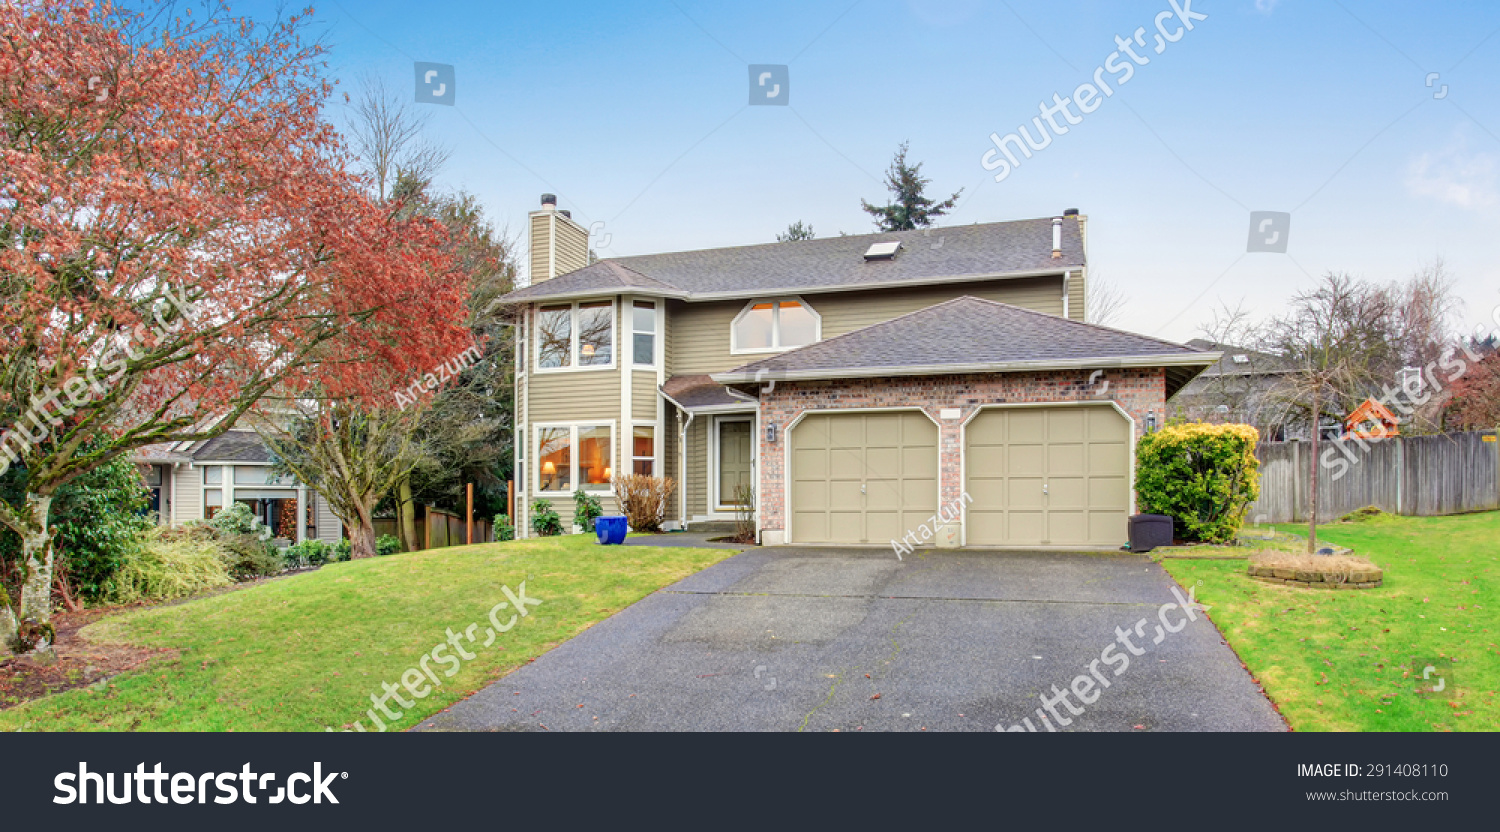 Traditional northwest house with driveway and garage. #291408110